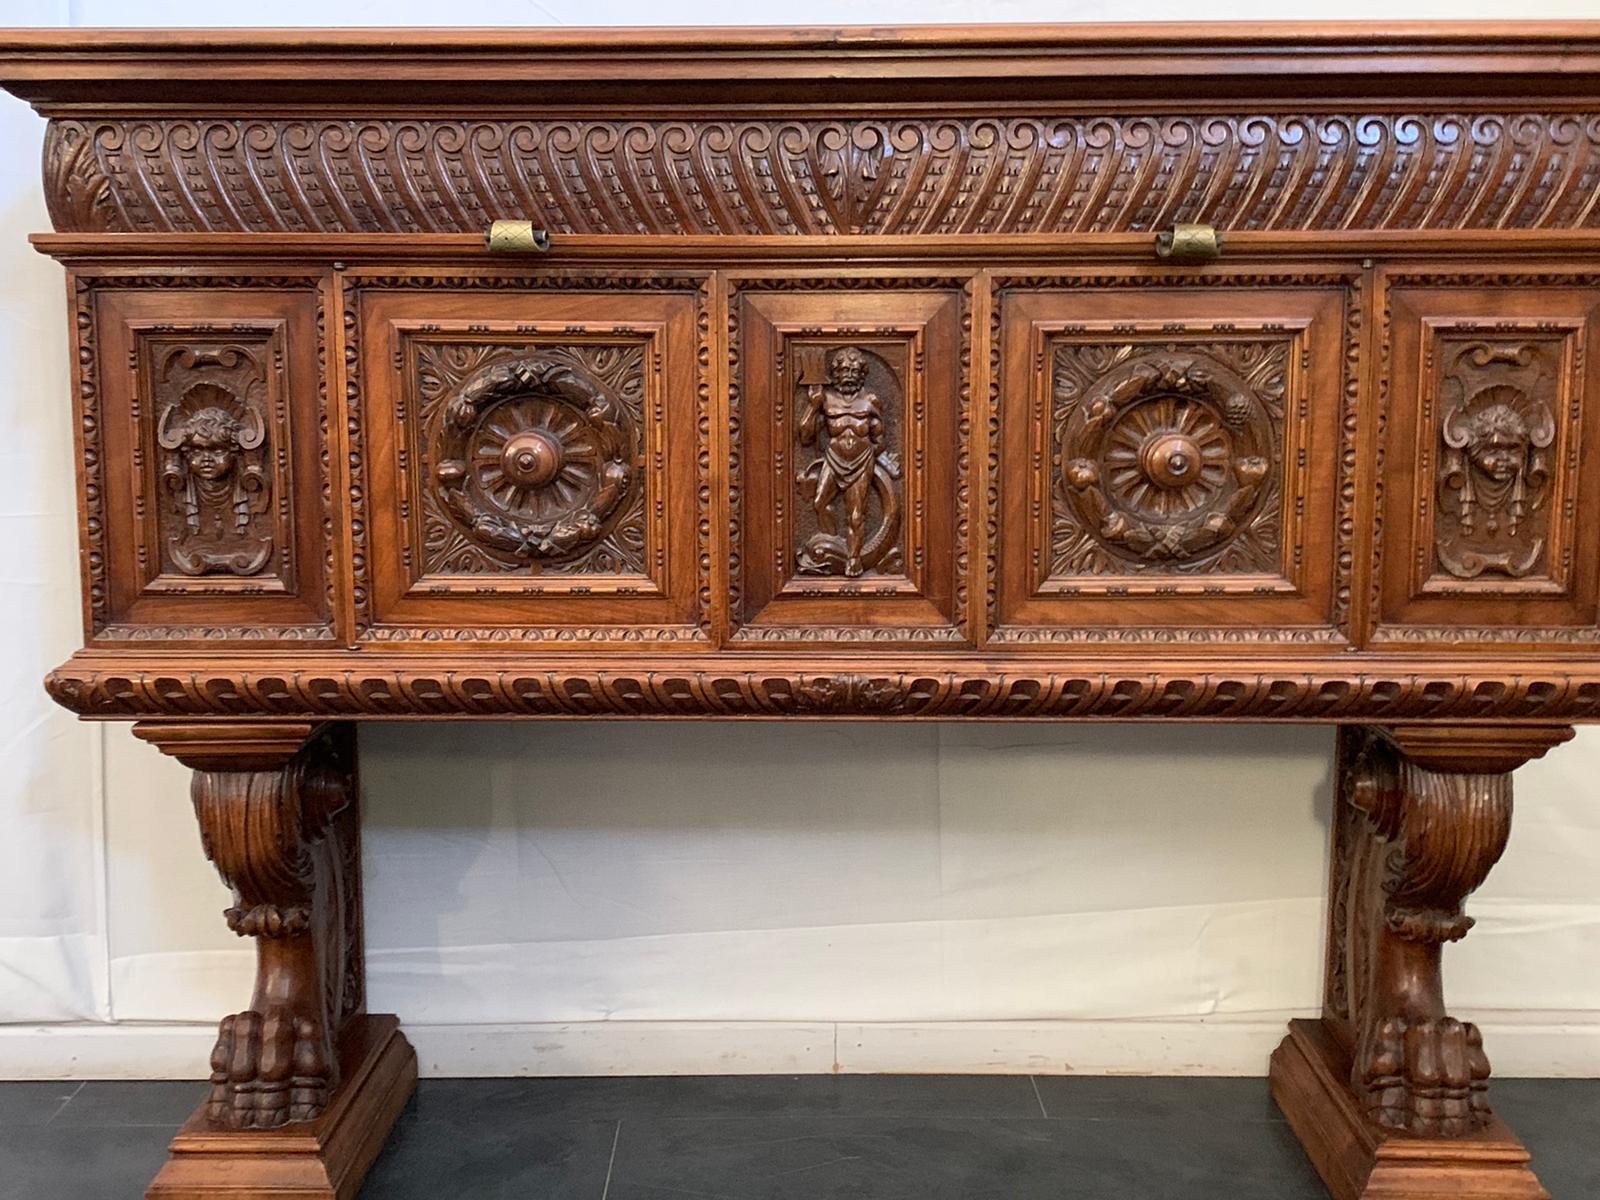 Renaissance sideboard in blond walnut with bronze handles. High quality and high cabinetry, made in Tuscany in the late 19th century and early 20th century. In excellent condition no lacks as photos. Origin villa Campari.
Packaging with bubble wrap